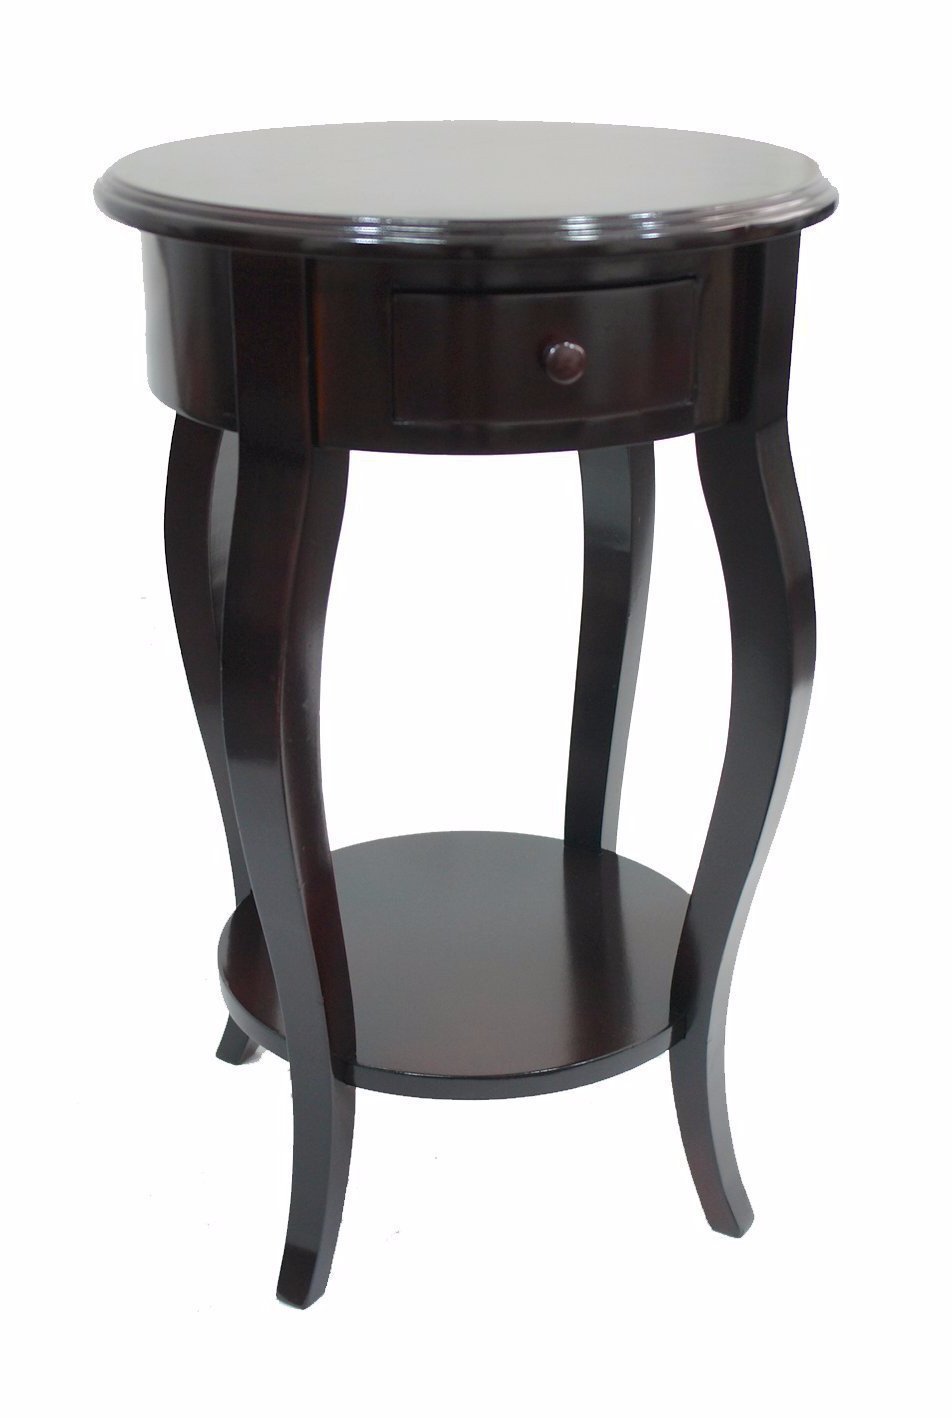 round accent side table dark brown urbanest keffl tables small white kitchen and chairs student desks for home metal outdoor target tiffany style lamp shades hallway console